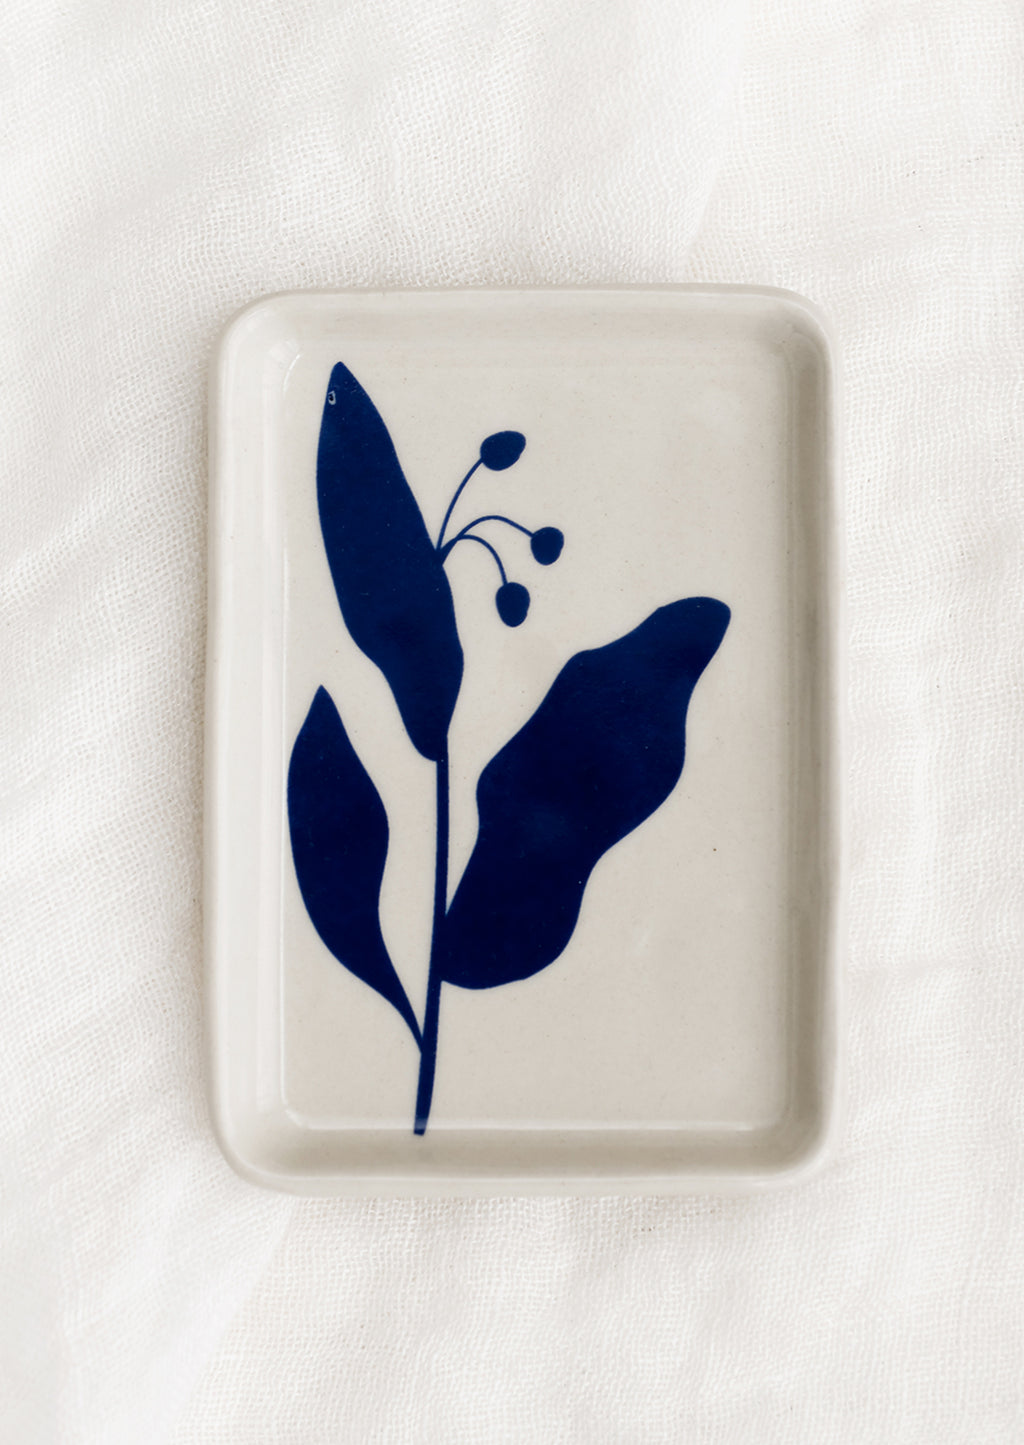 Small: A white ceramic tay with blue floral print.